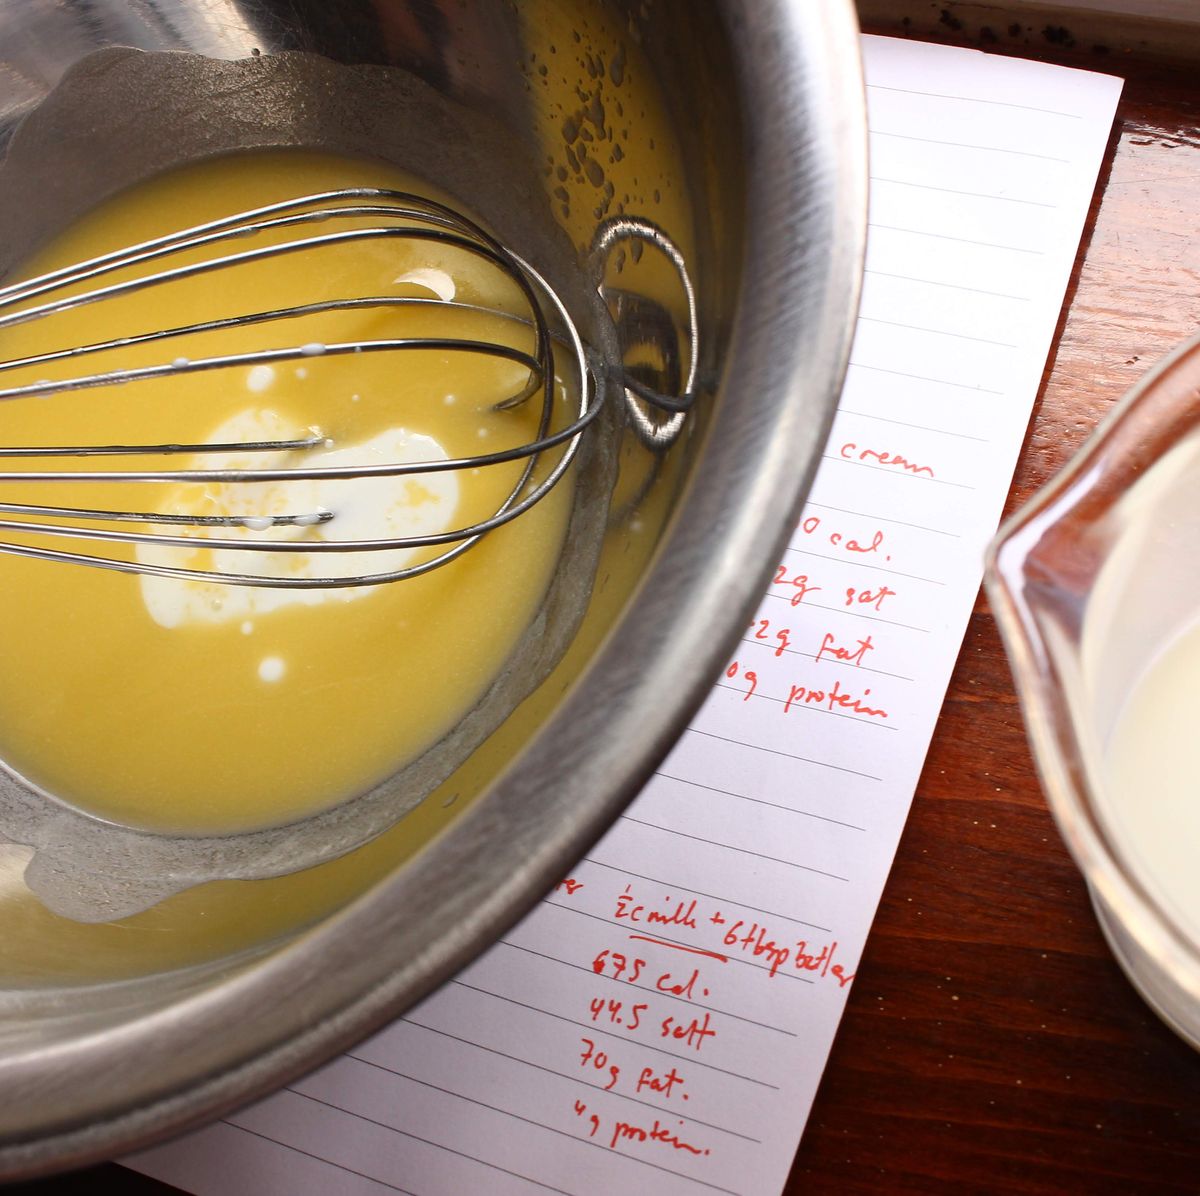 Top 10 Substitutes for Heavy Cream That Work In A Pinch